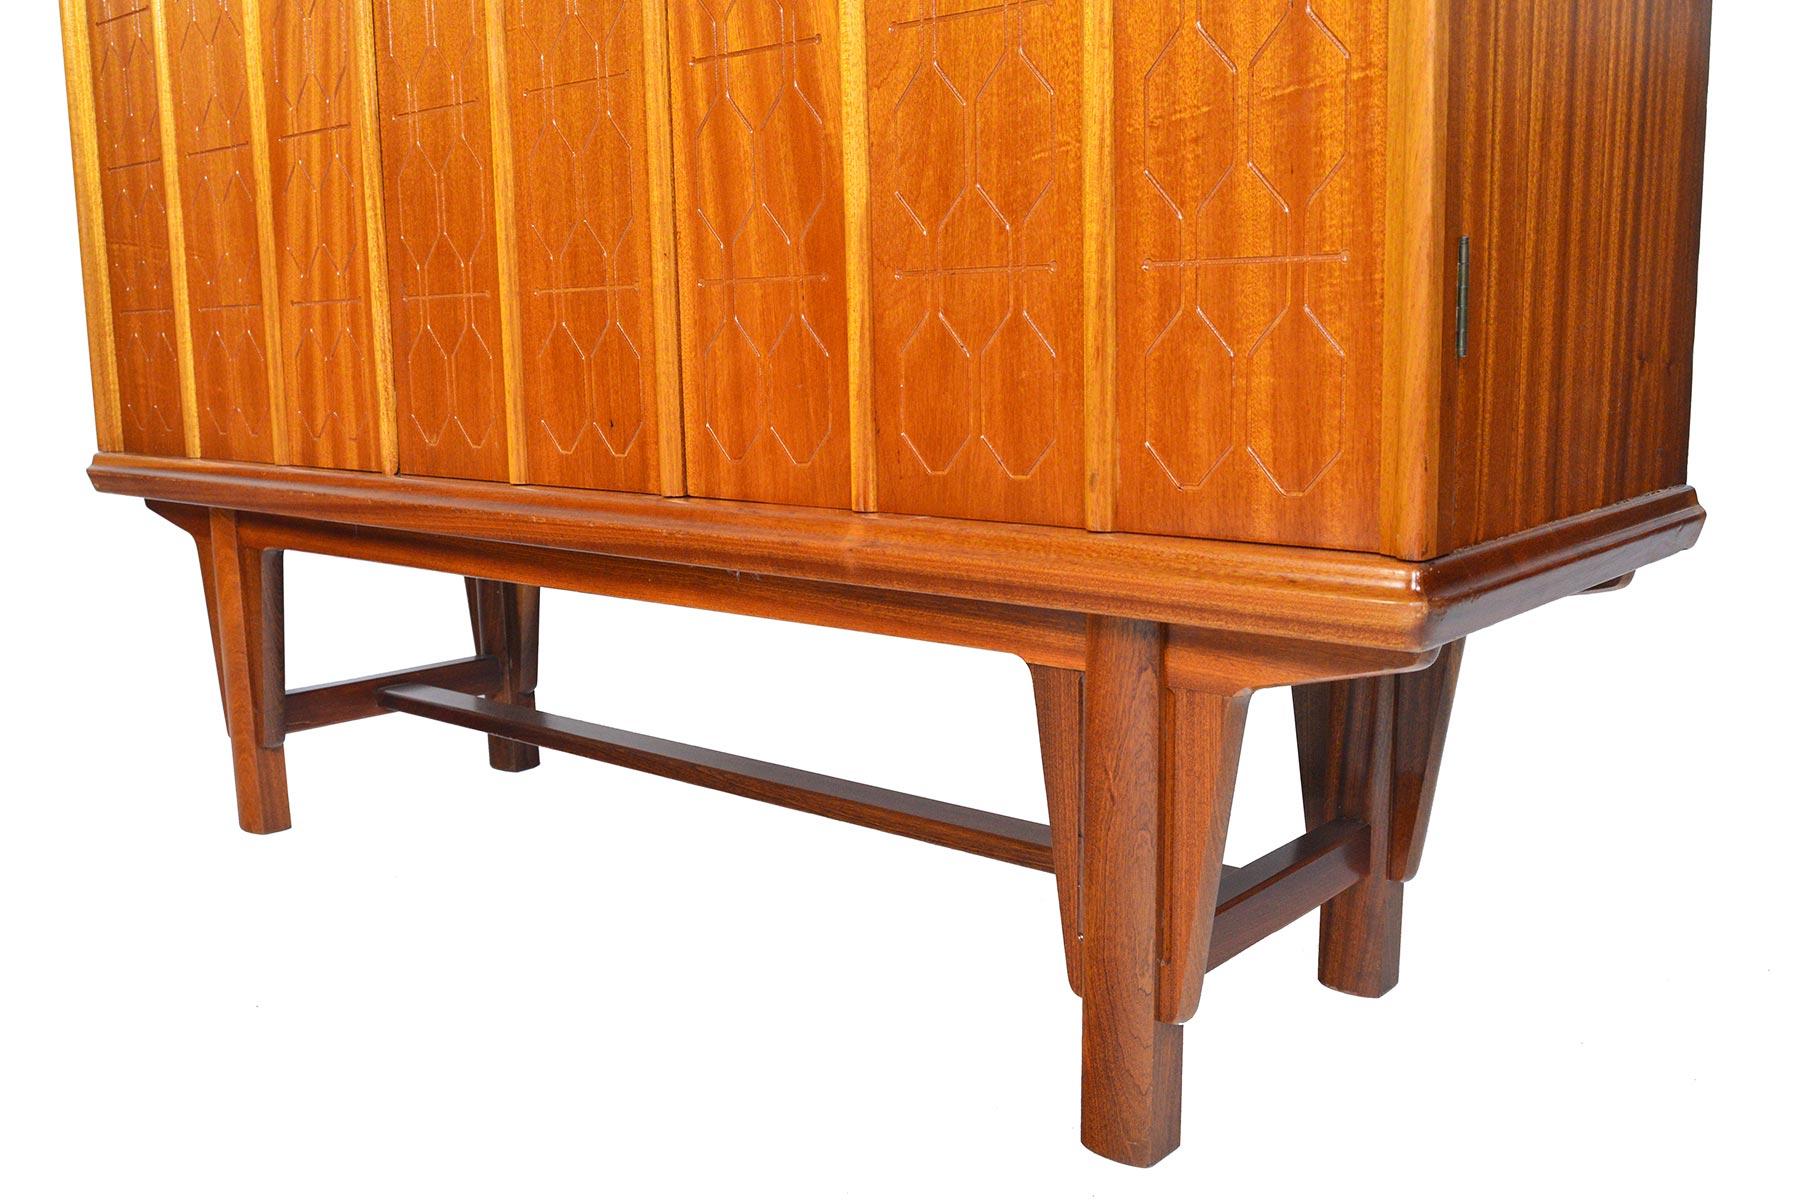 Tall Rastad and Relling Tall Geometric Credenza in Mahogany 6